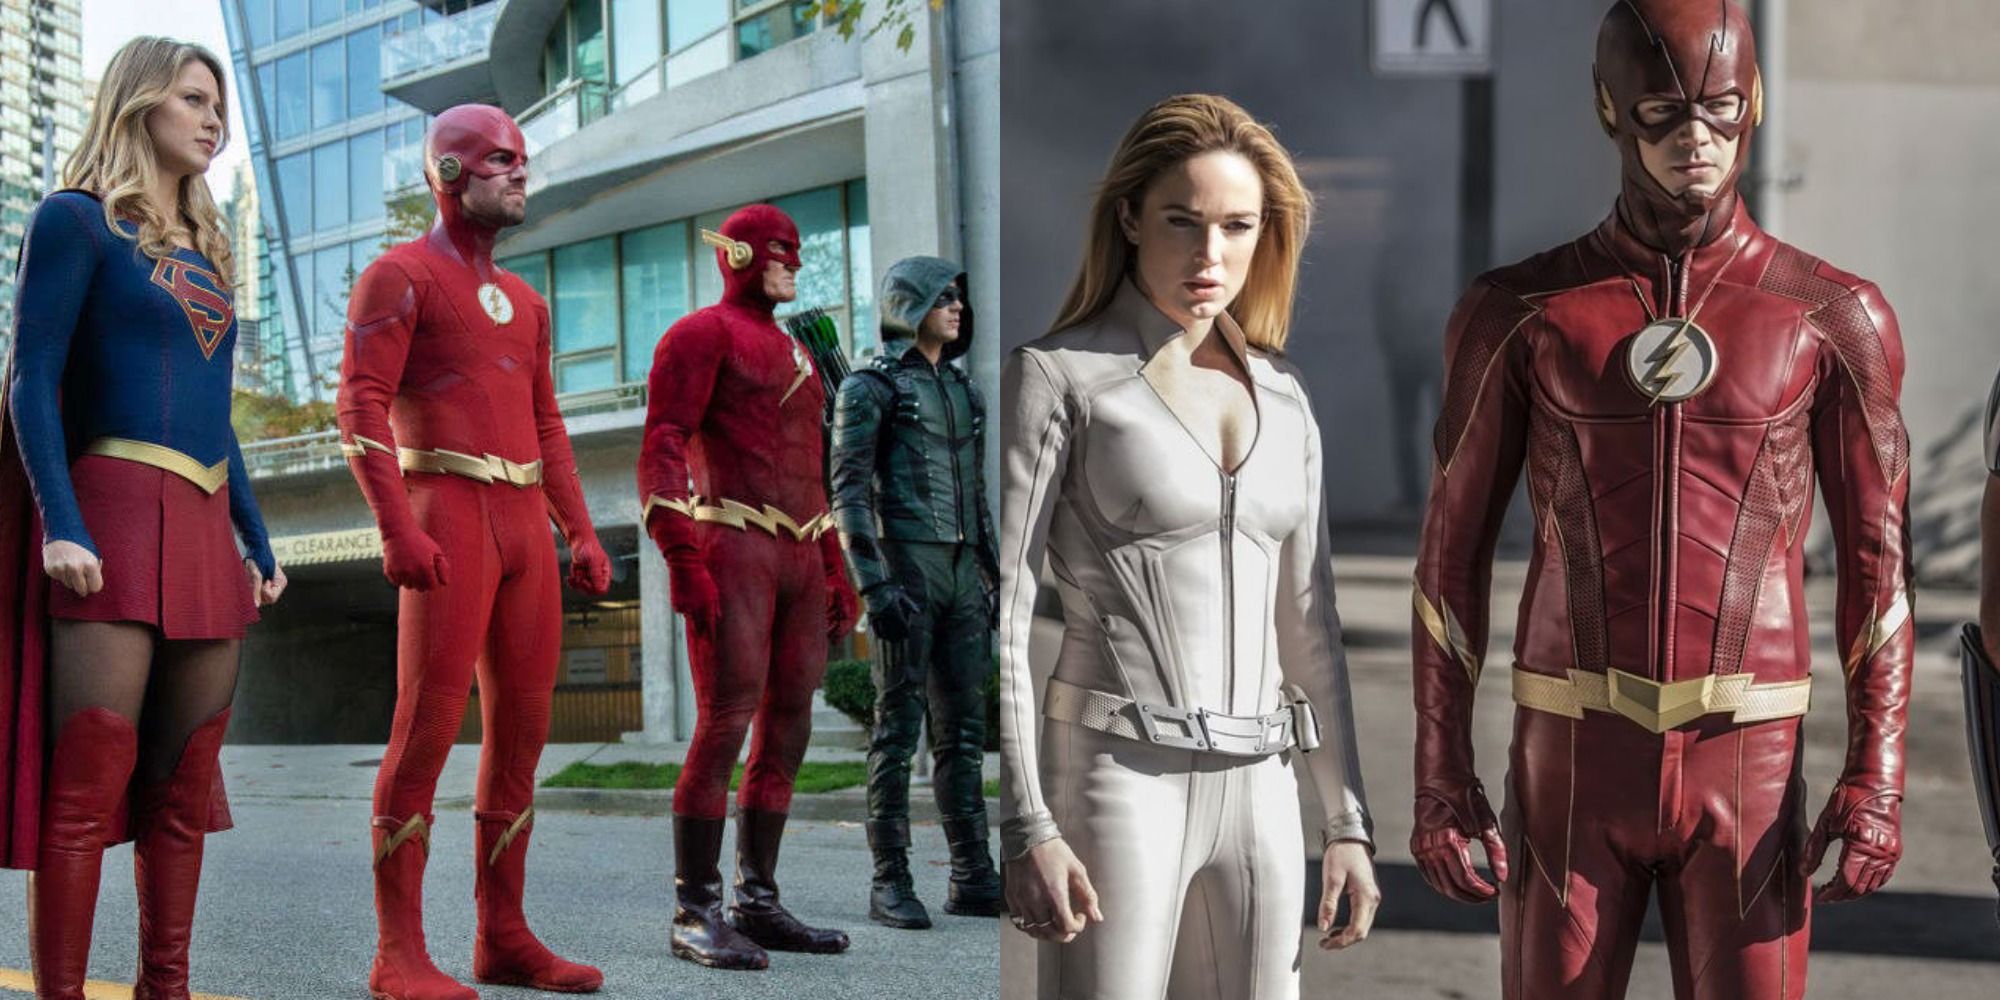 The 10 Best Arrowverse Crossover Episodes According To IMDb